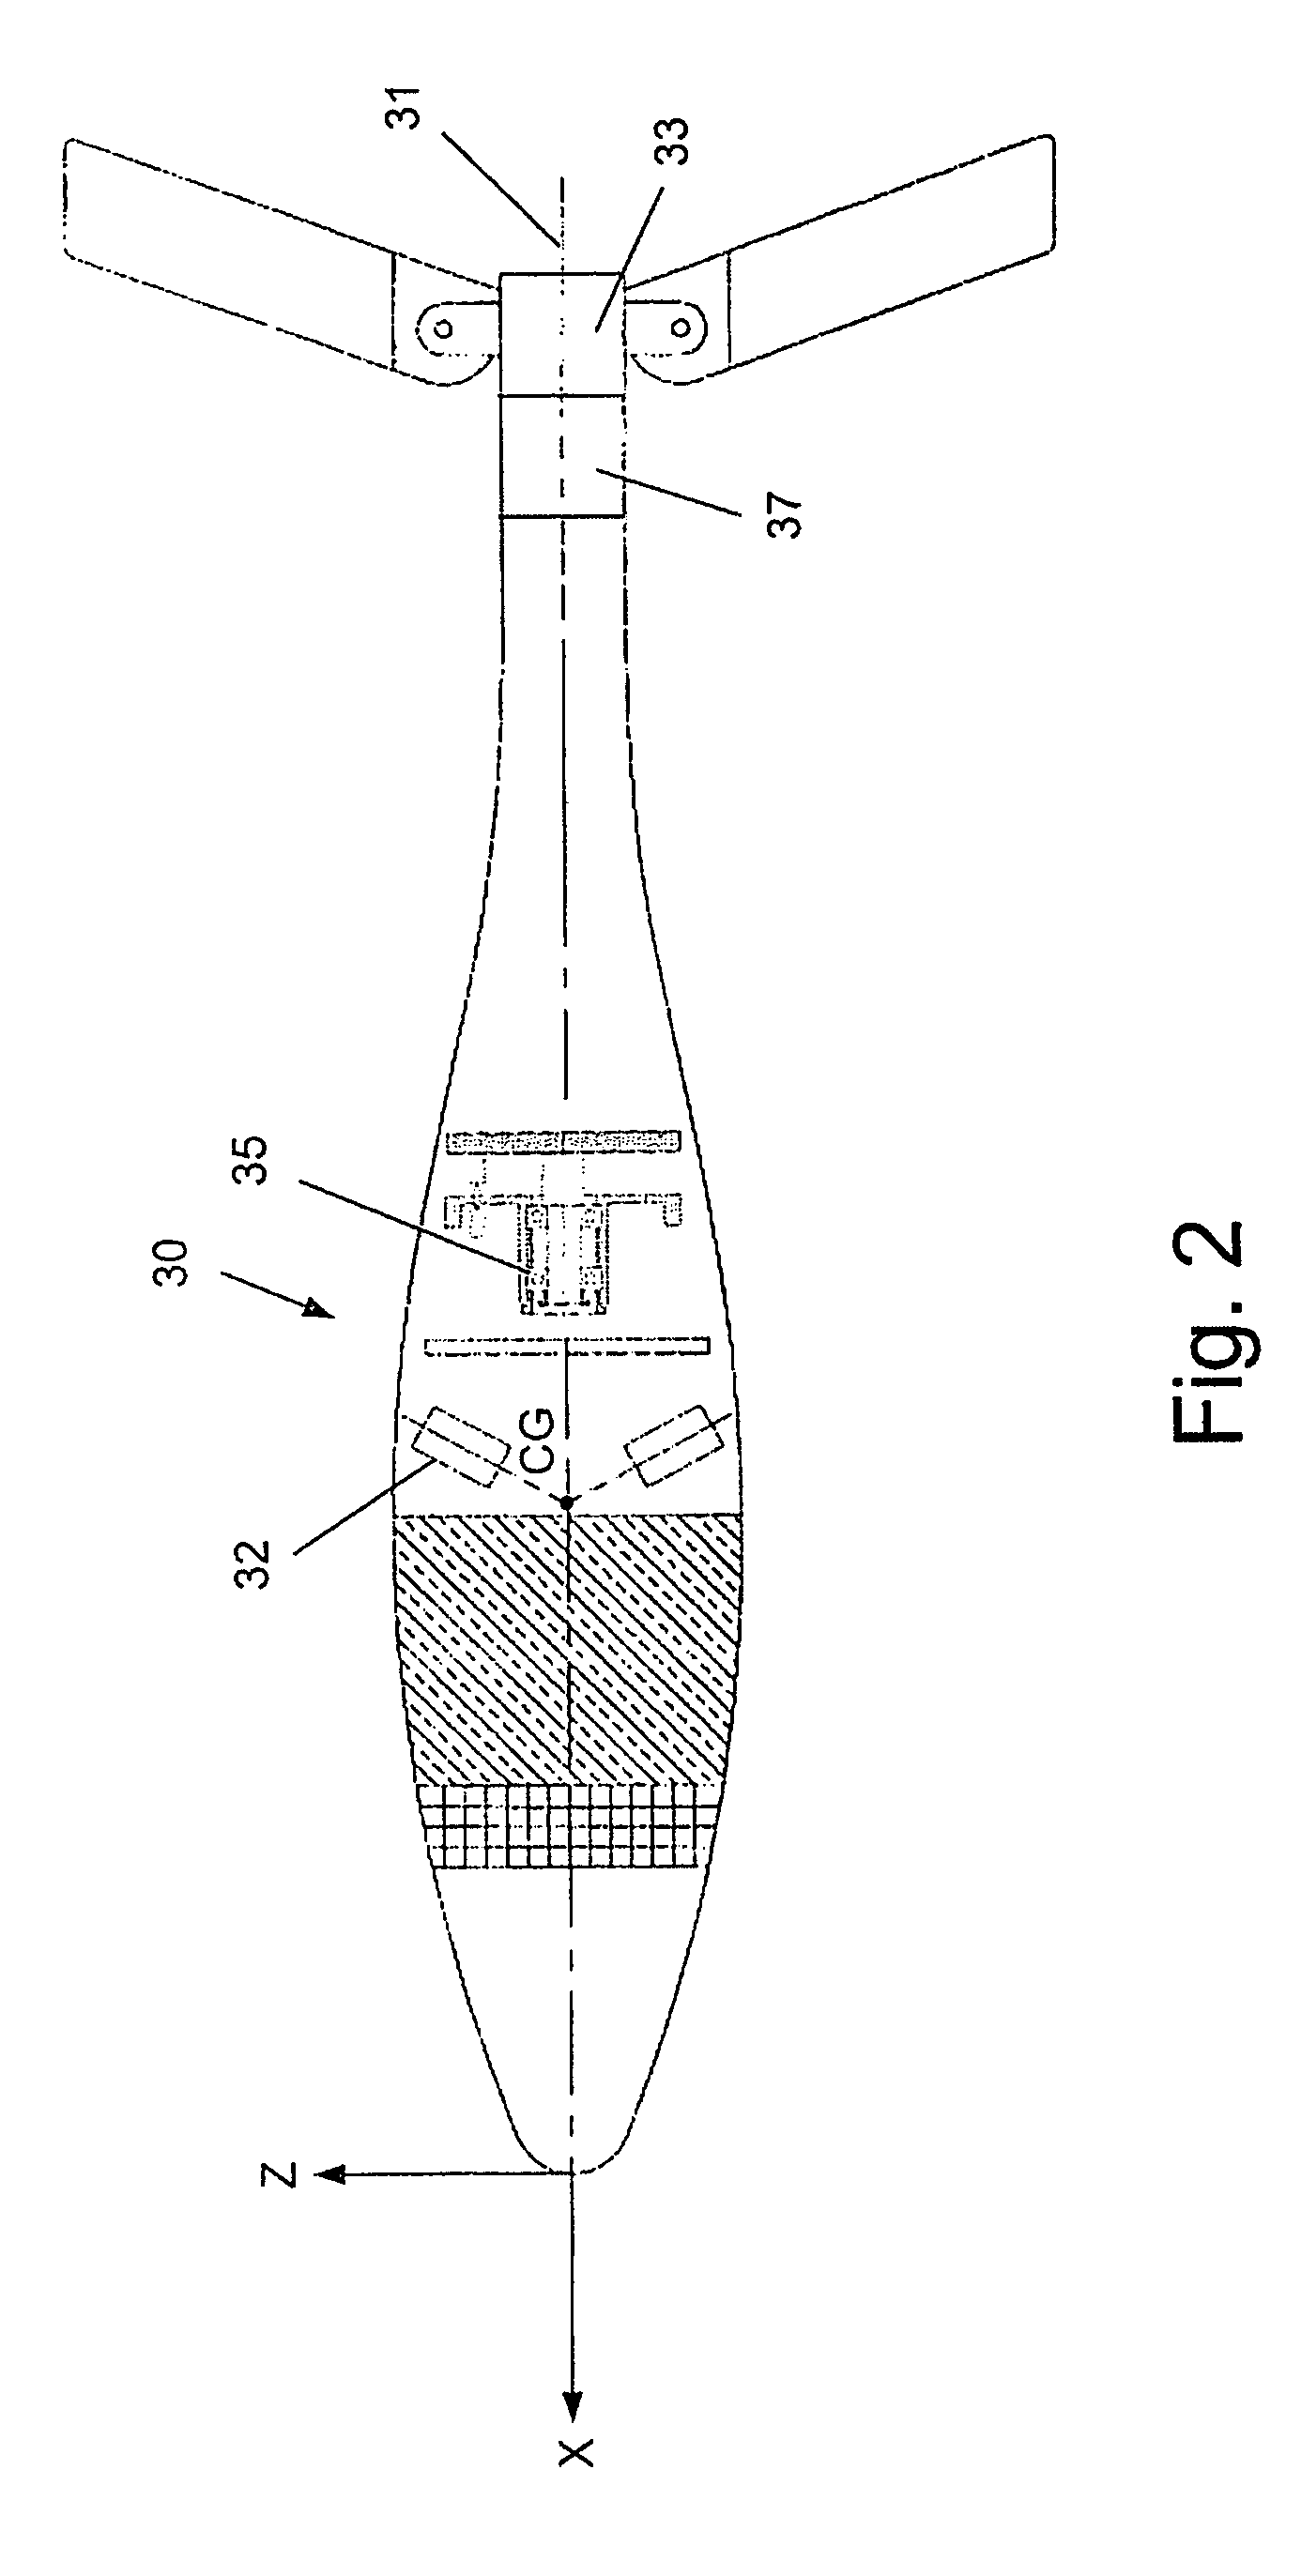 Method and system for adjusting the flight path of an unguided projectile, with compensation for jittering deviation